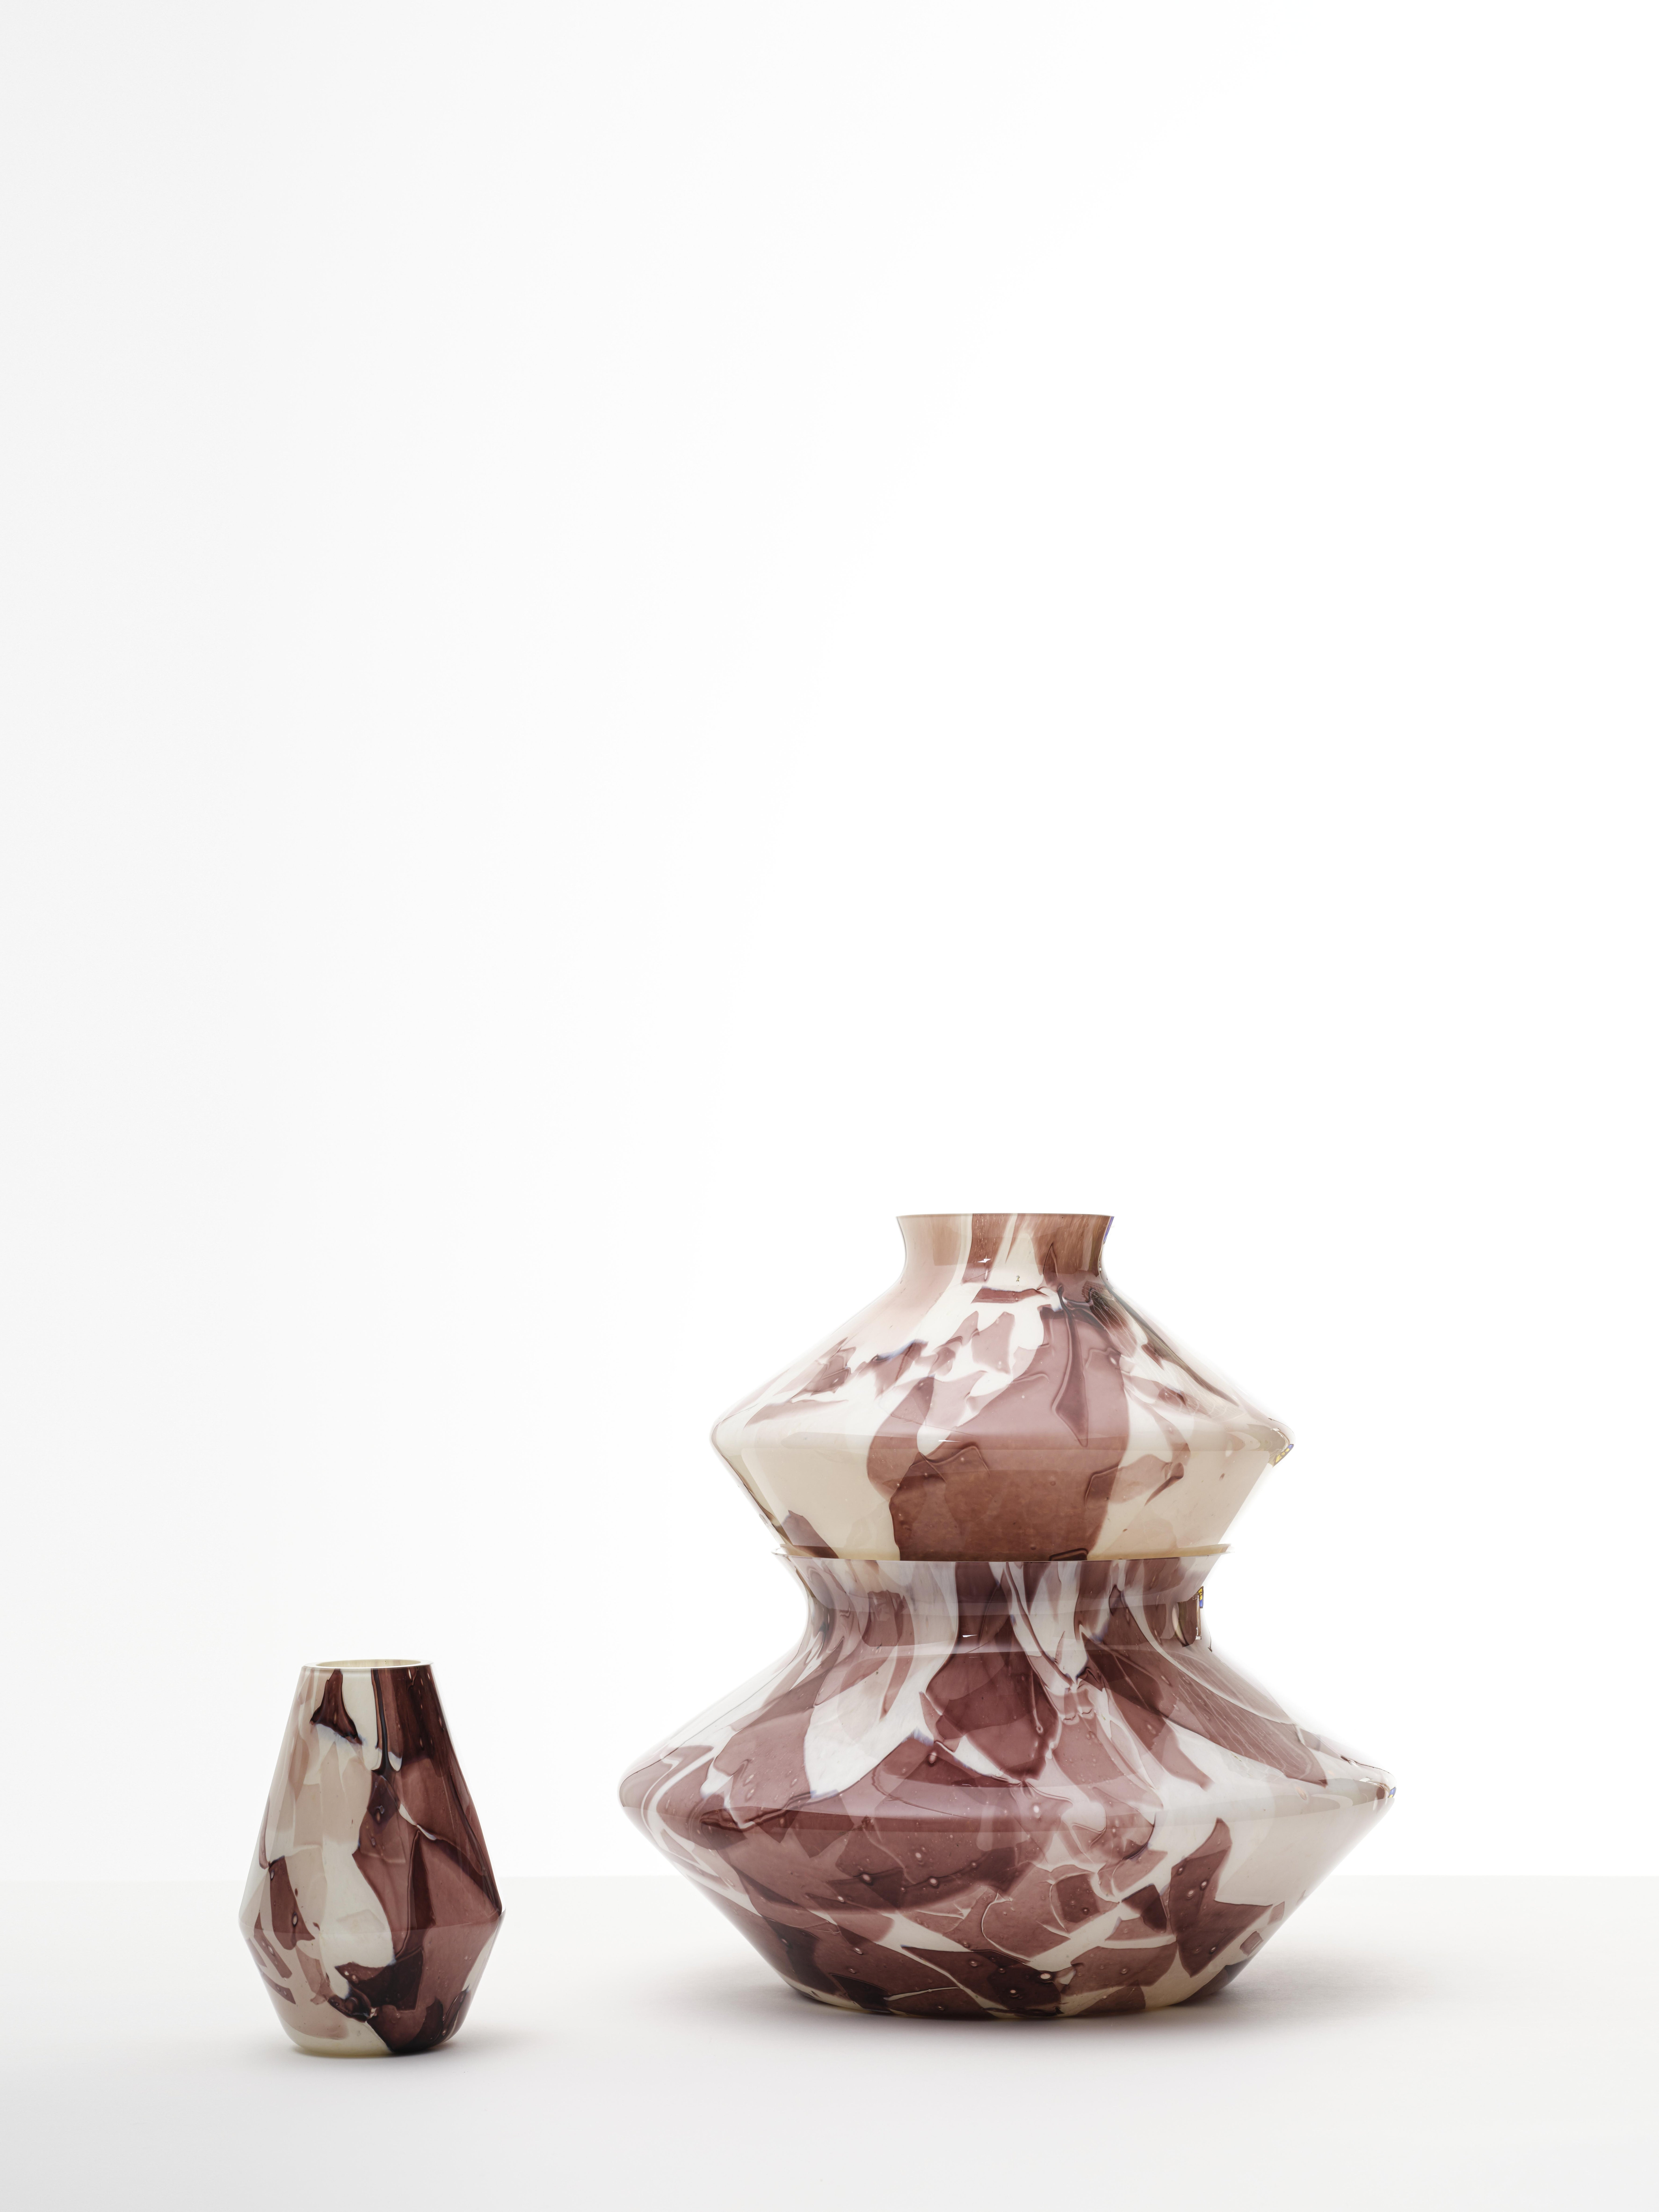 Murano Glass Amethyst Variopinto Trio of Vases by Stories of Italy with Alberto and Francesco Meda
“In 2010, Borek Sipek invited myself and designers Andrea Branzi, Ron Arad, Oscar Tusquets and Nanda Vigo to design a blown glass object that would be